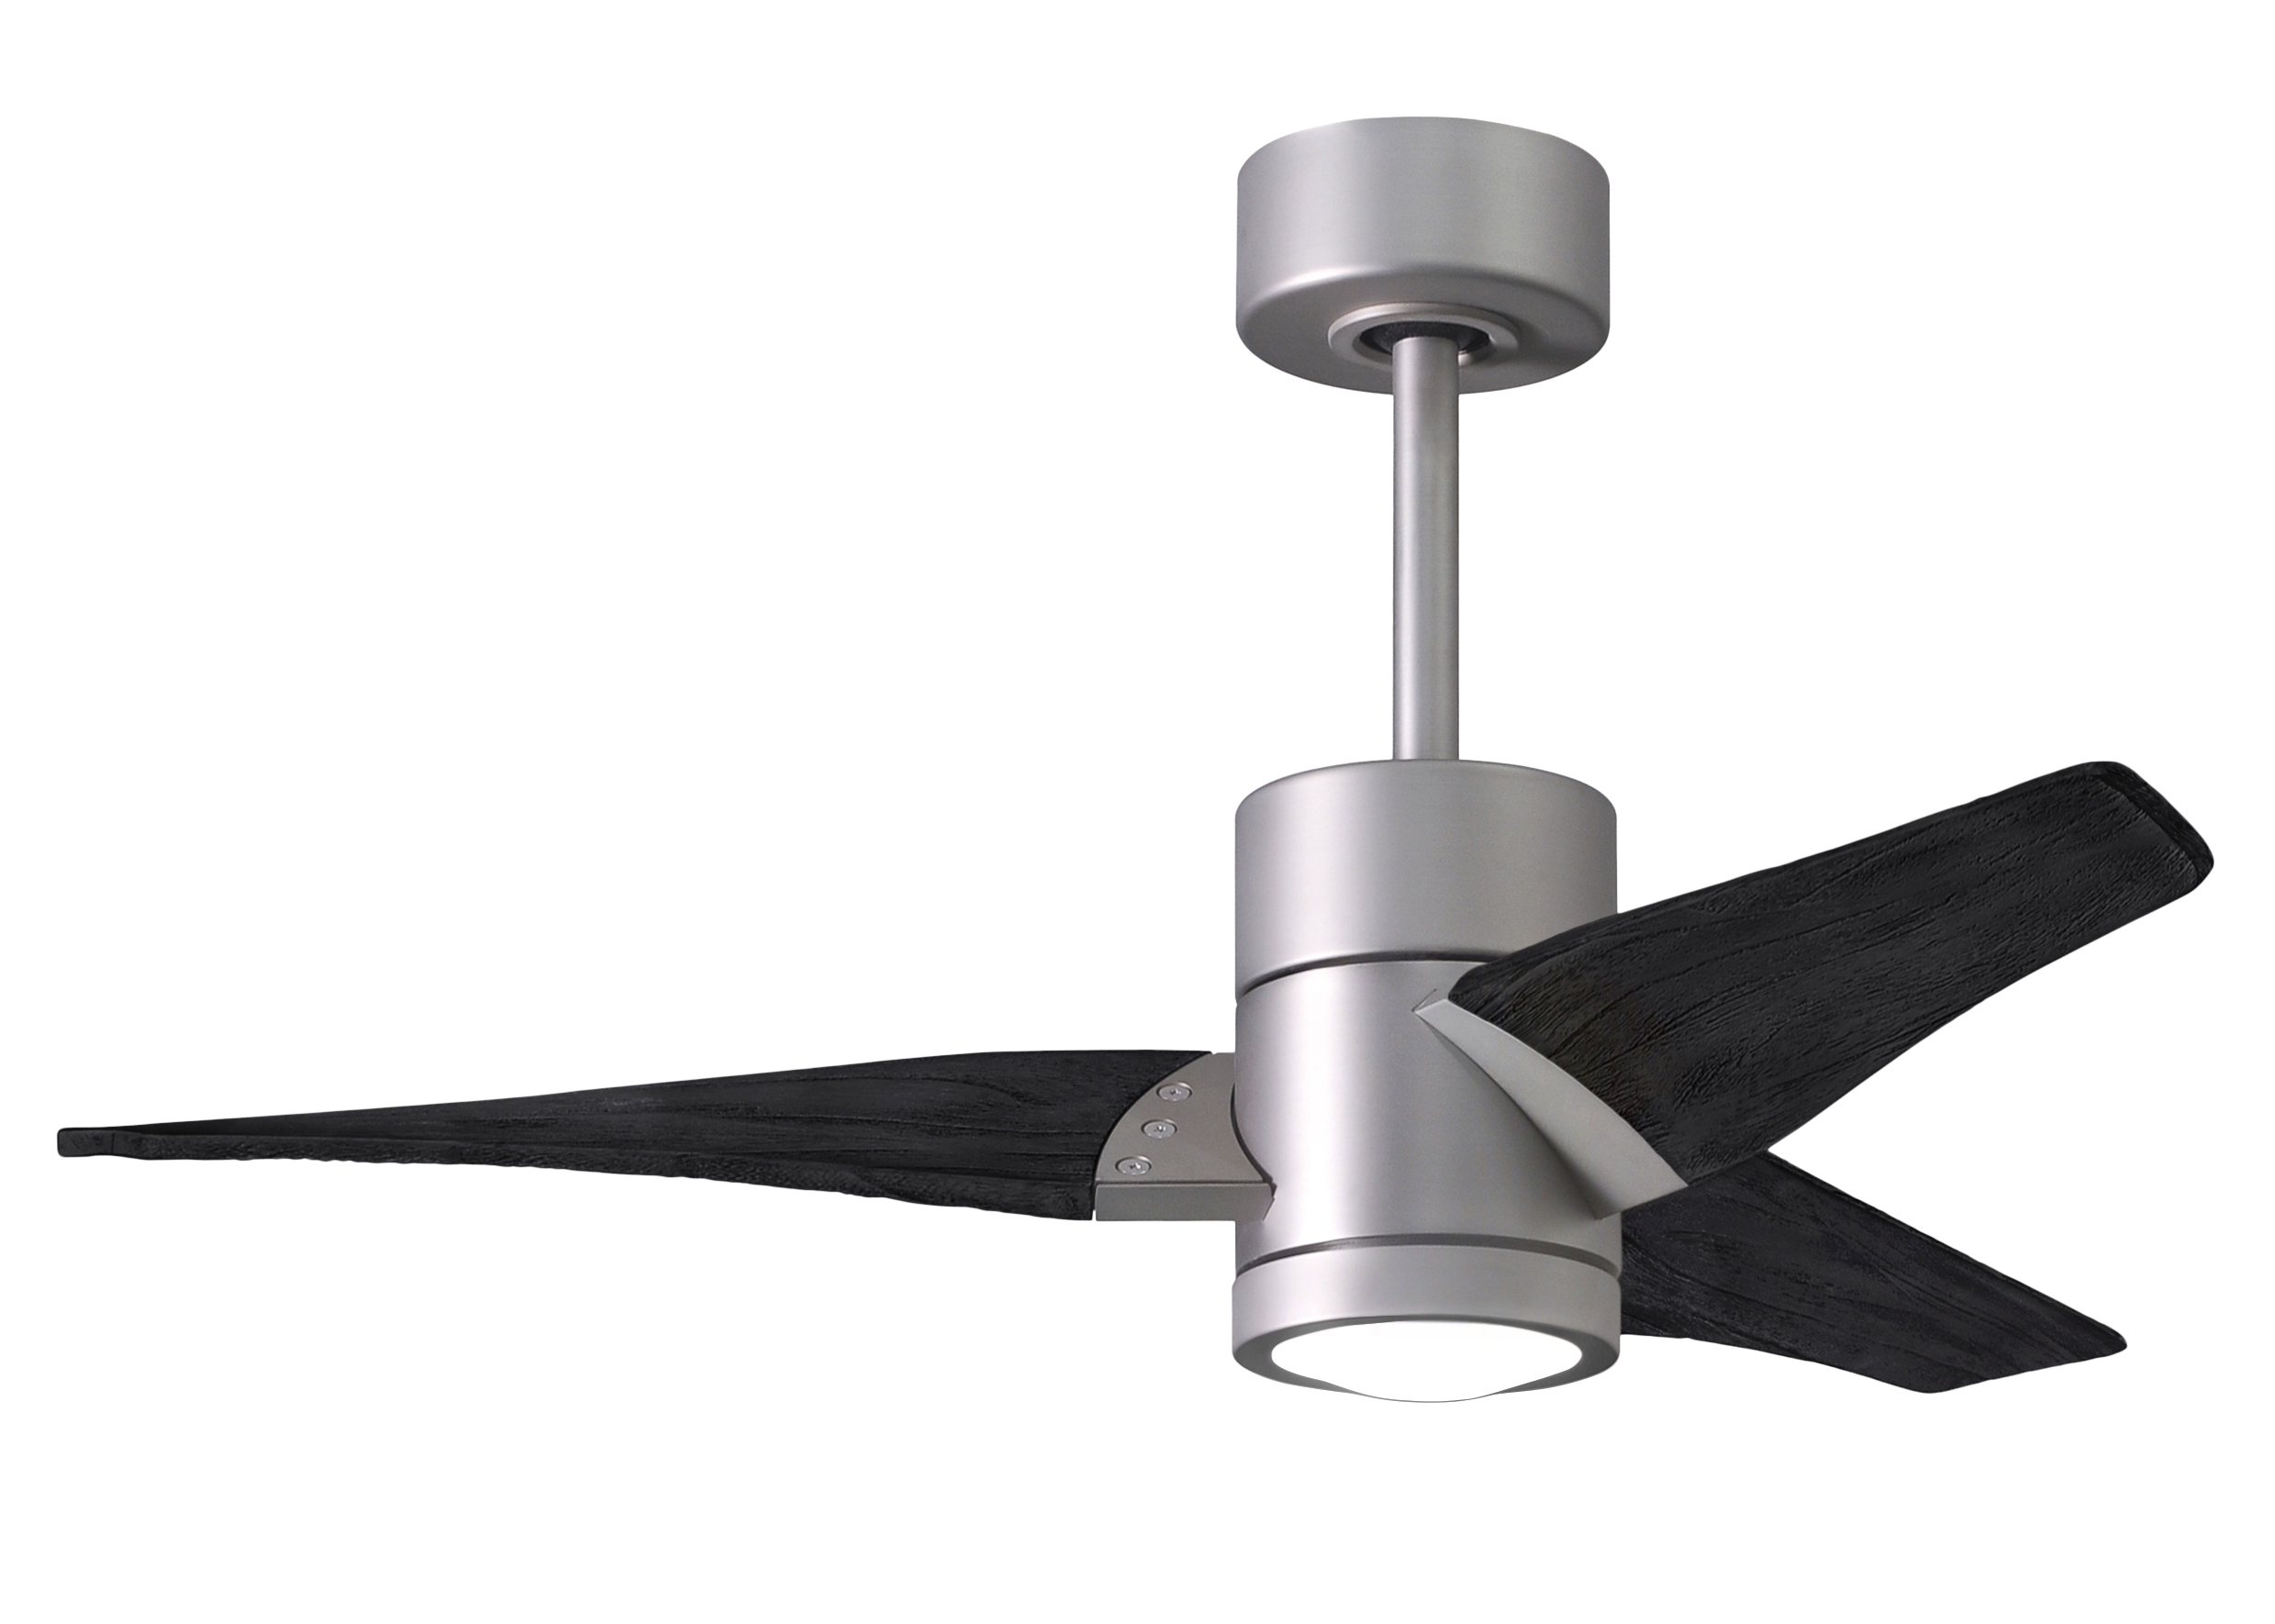 Super Janet 6 speed Ceiling Fan in Brushed Nickel Finish with 42